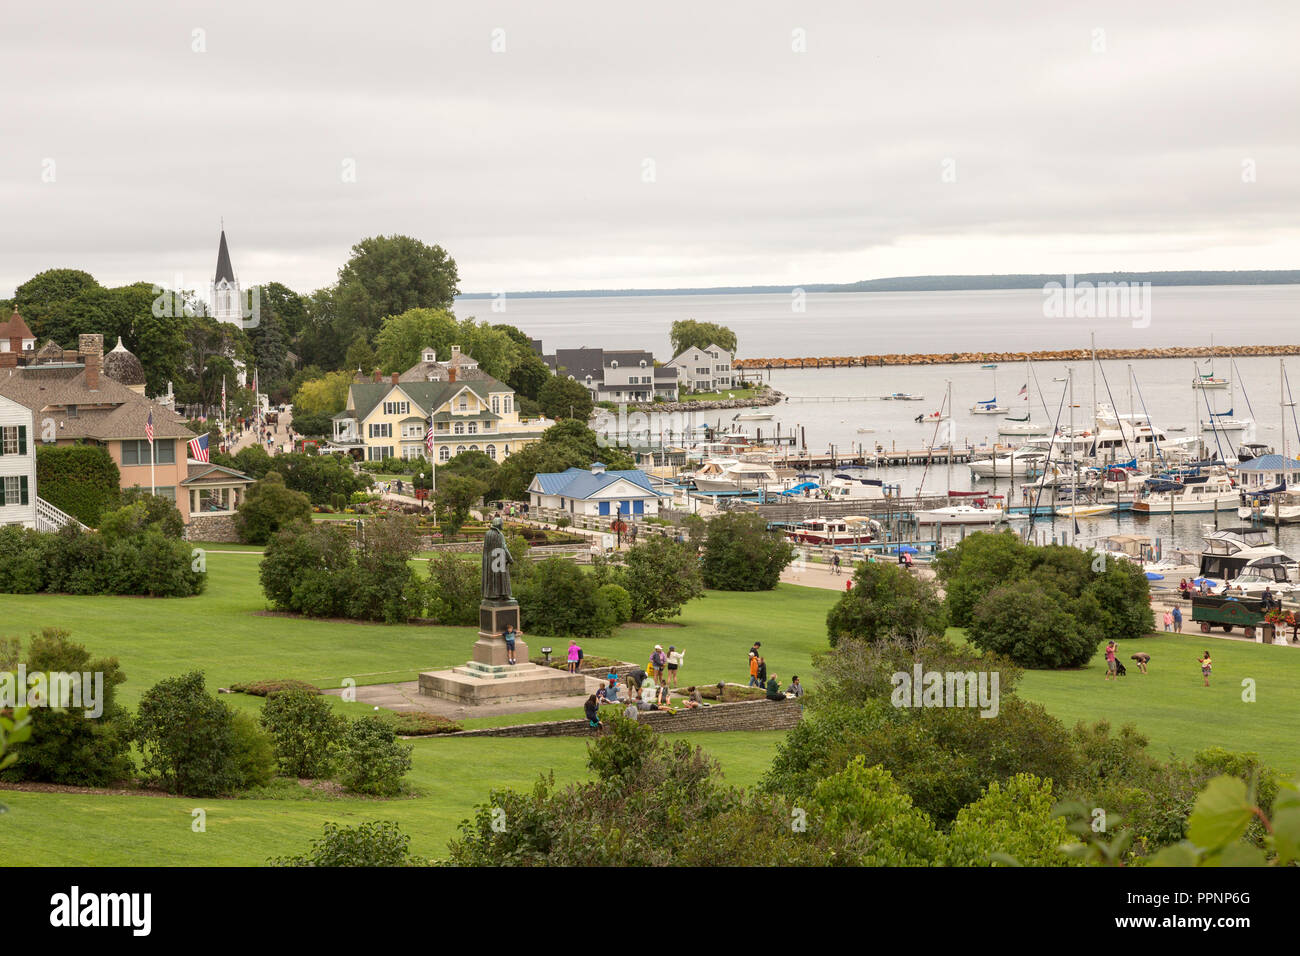 View from above of the town, harbor and Marquette Park with tourists, on Mackinac Island, Michigan. Stock Photo